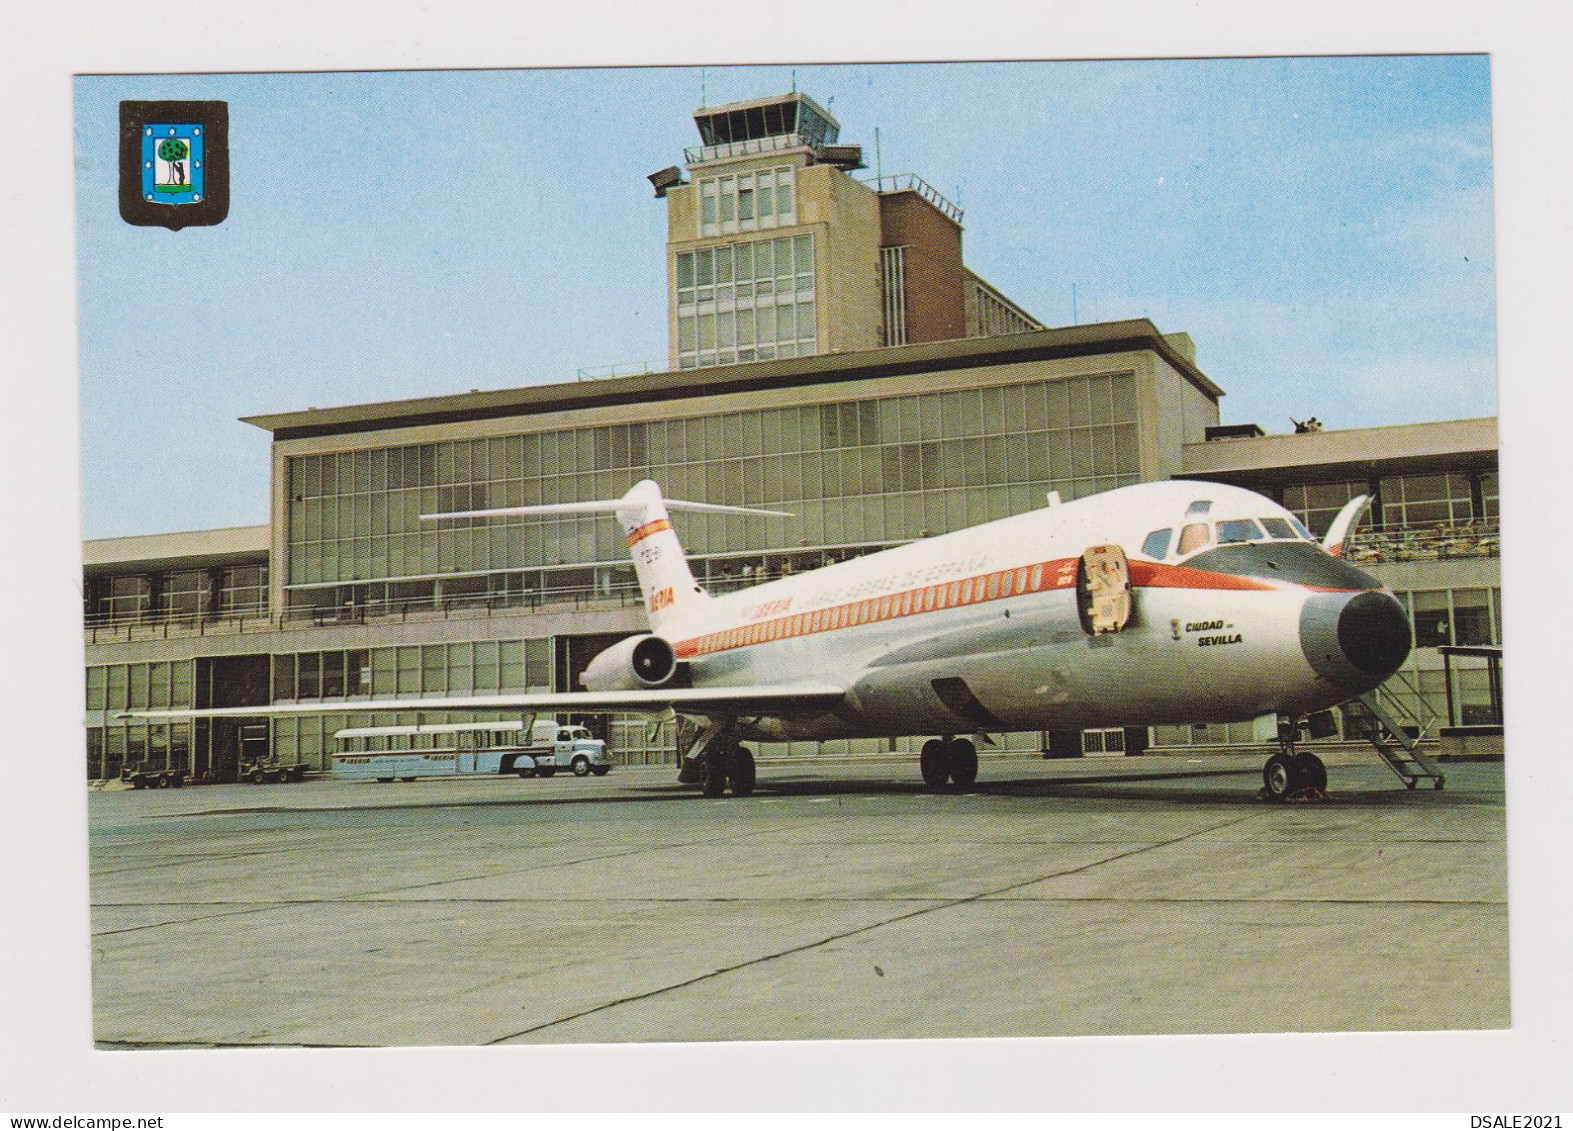 Spain MADRID "Barajas" Airport With IBERIA Carrier DC-9 Airplane, Jet, View Vintage Photo Postcard RPPc AK (734) - 1946-....: Ere Moderne